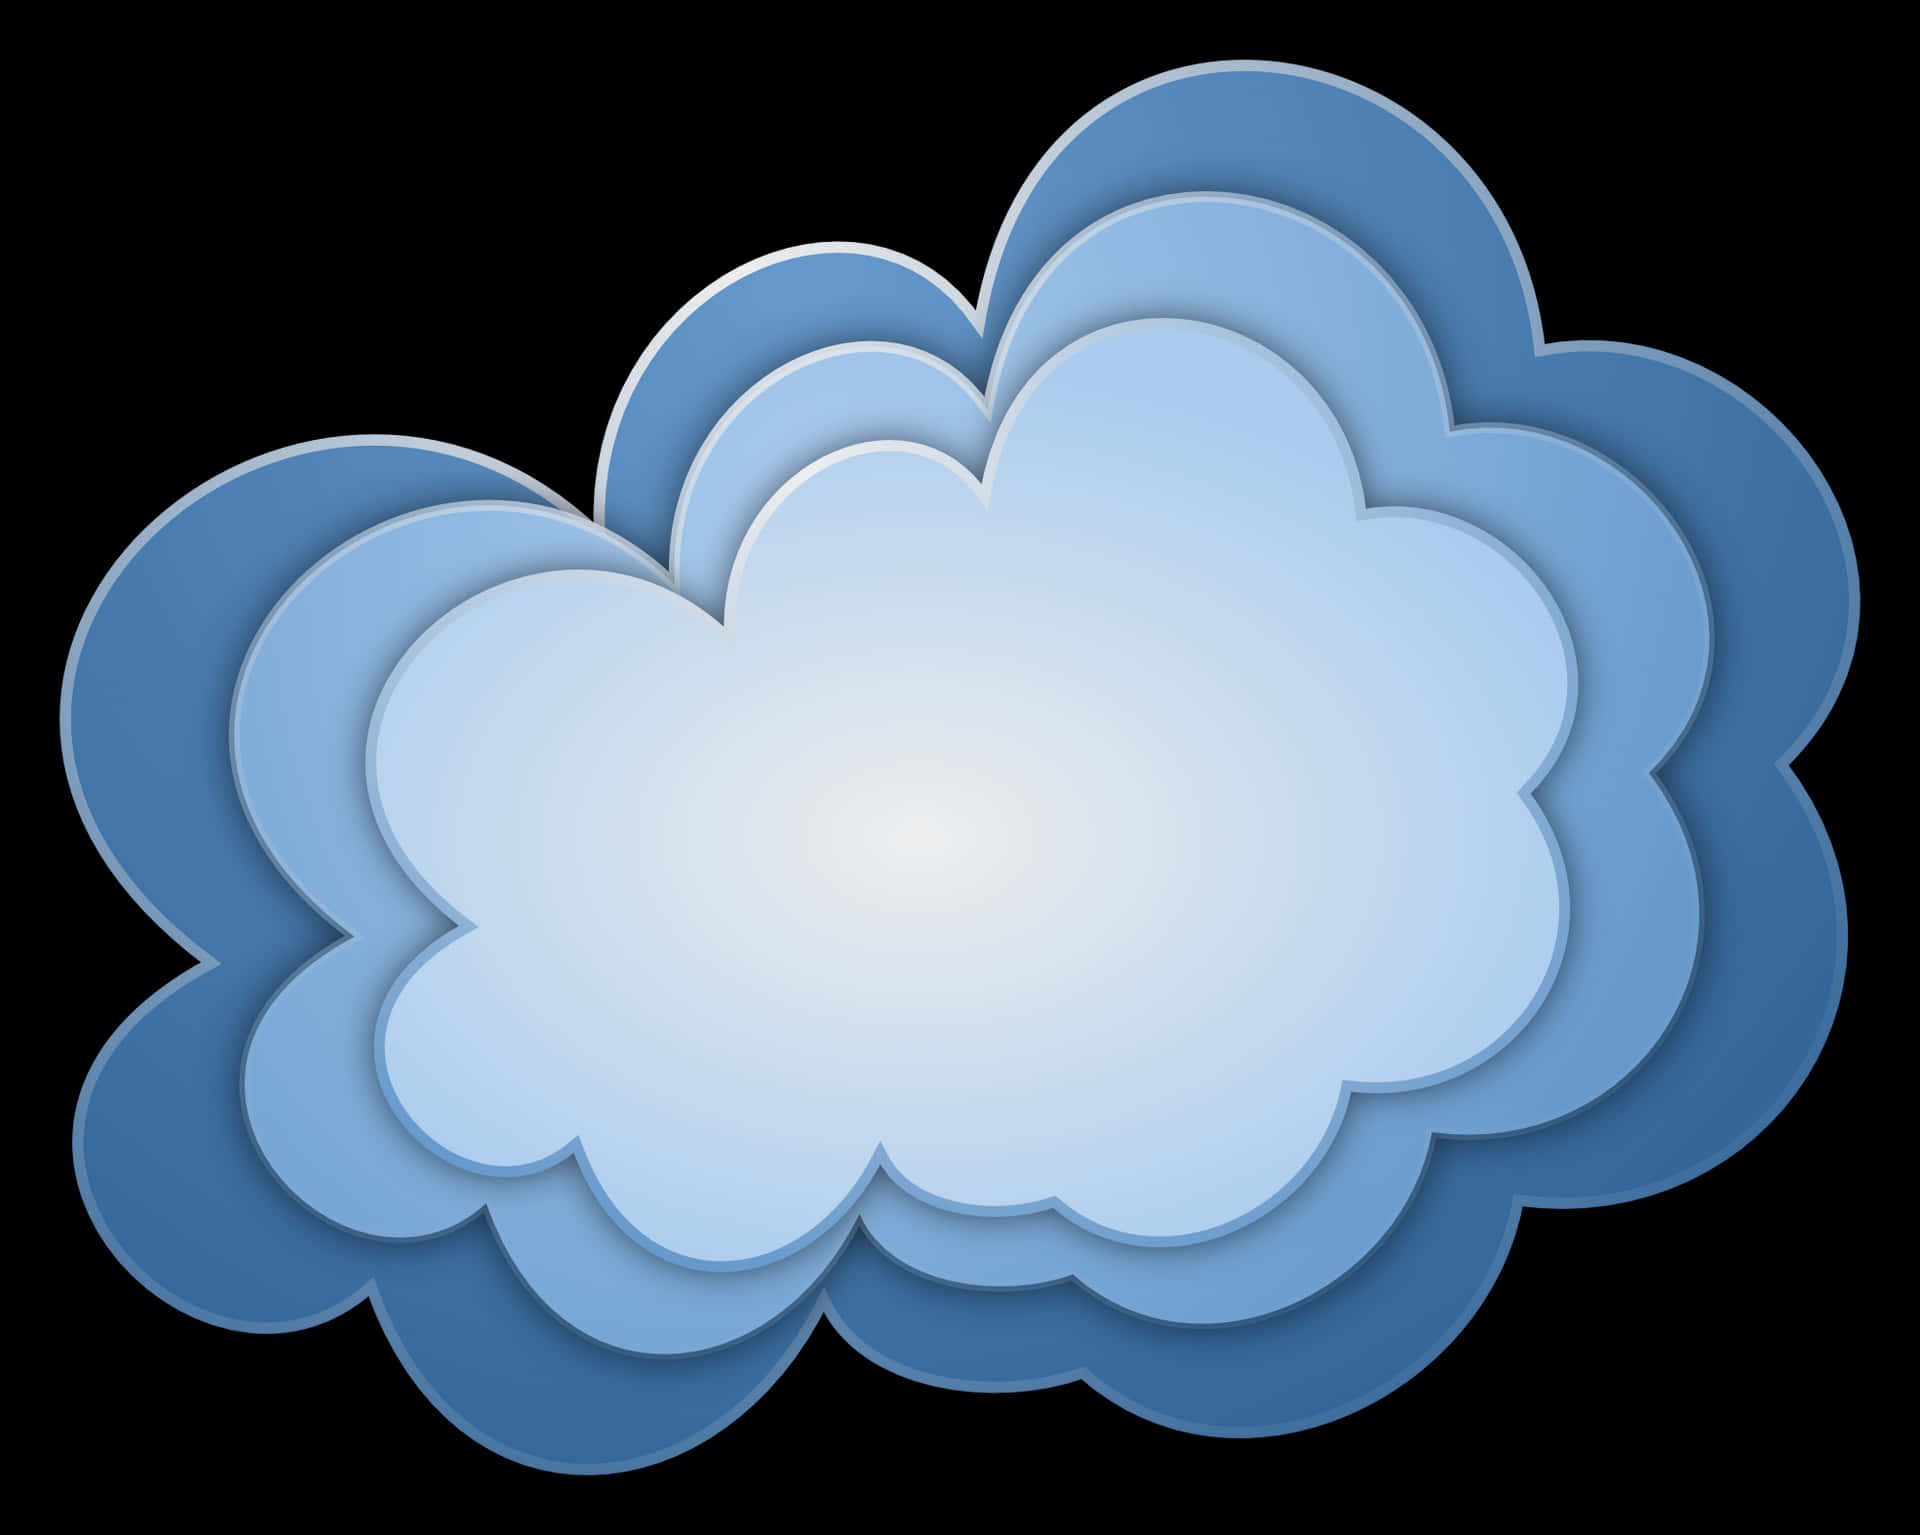 Layered Cloud Graphic PNG